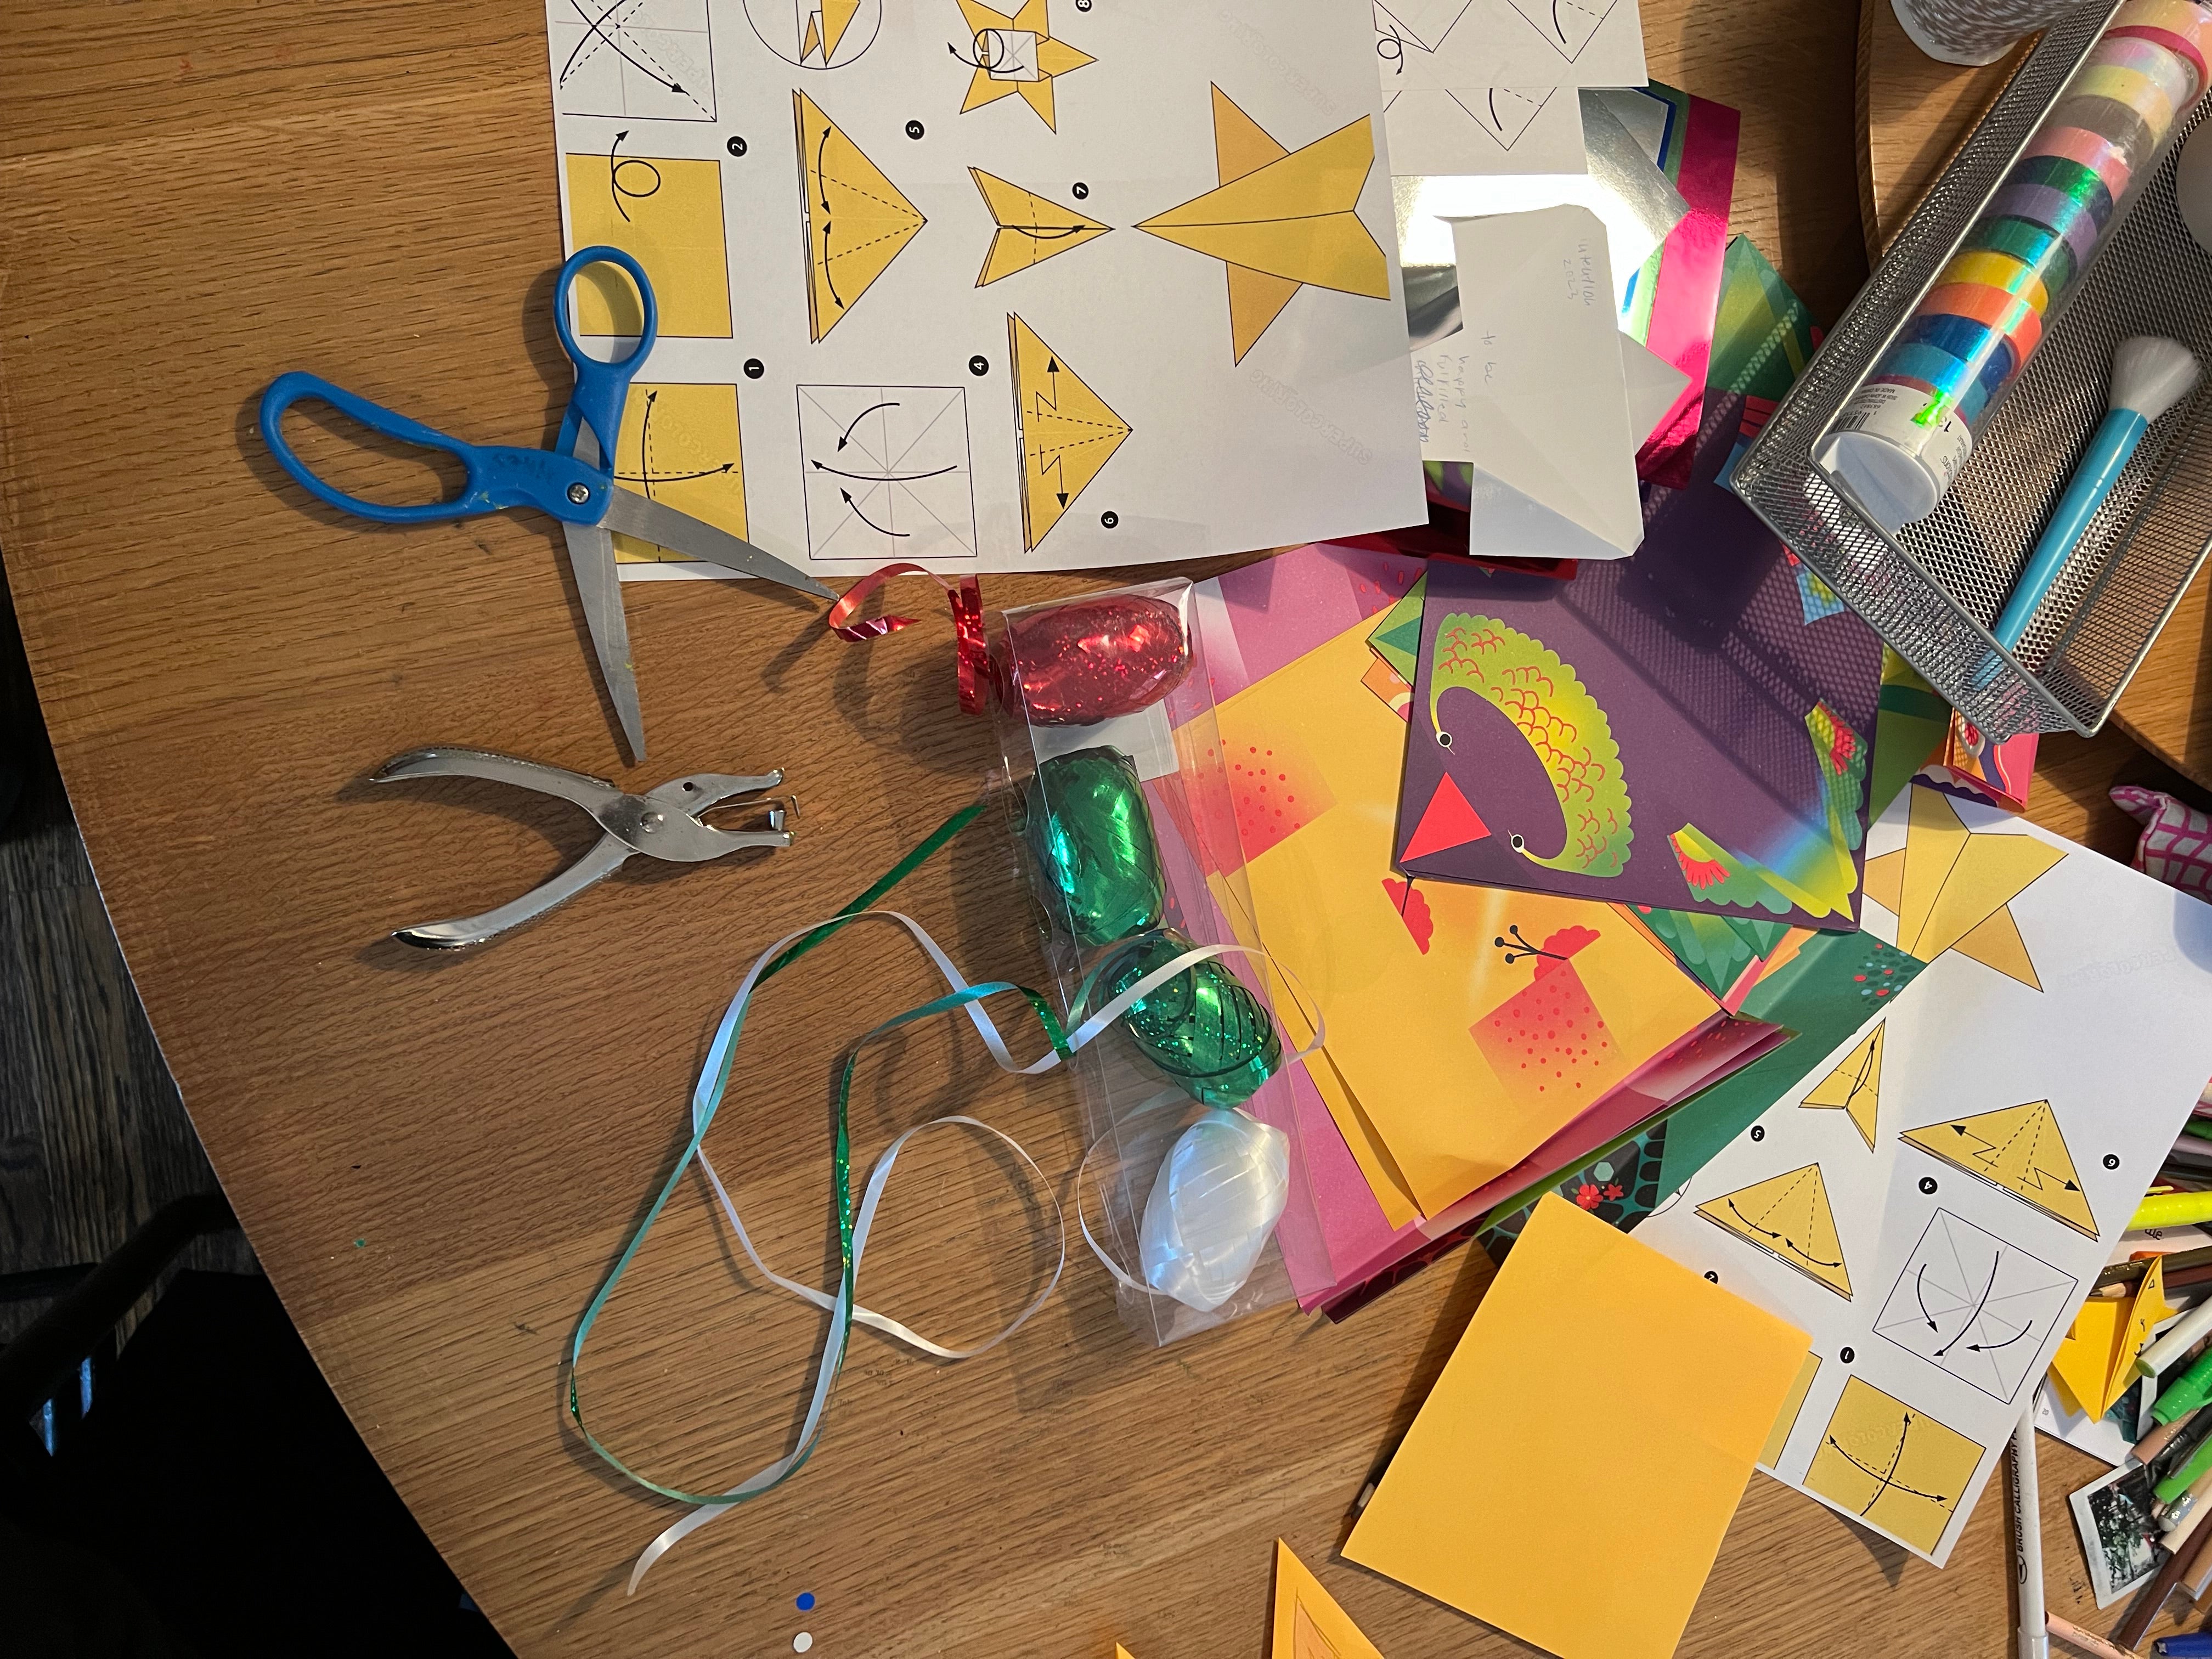 Image of scissors, hand held hole punch, Christmas gift wrap ribbon, printed origami instructions and other various craft supplies laying on a table